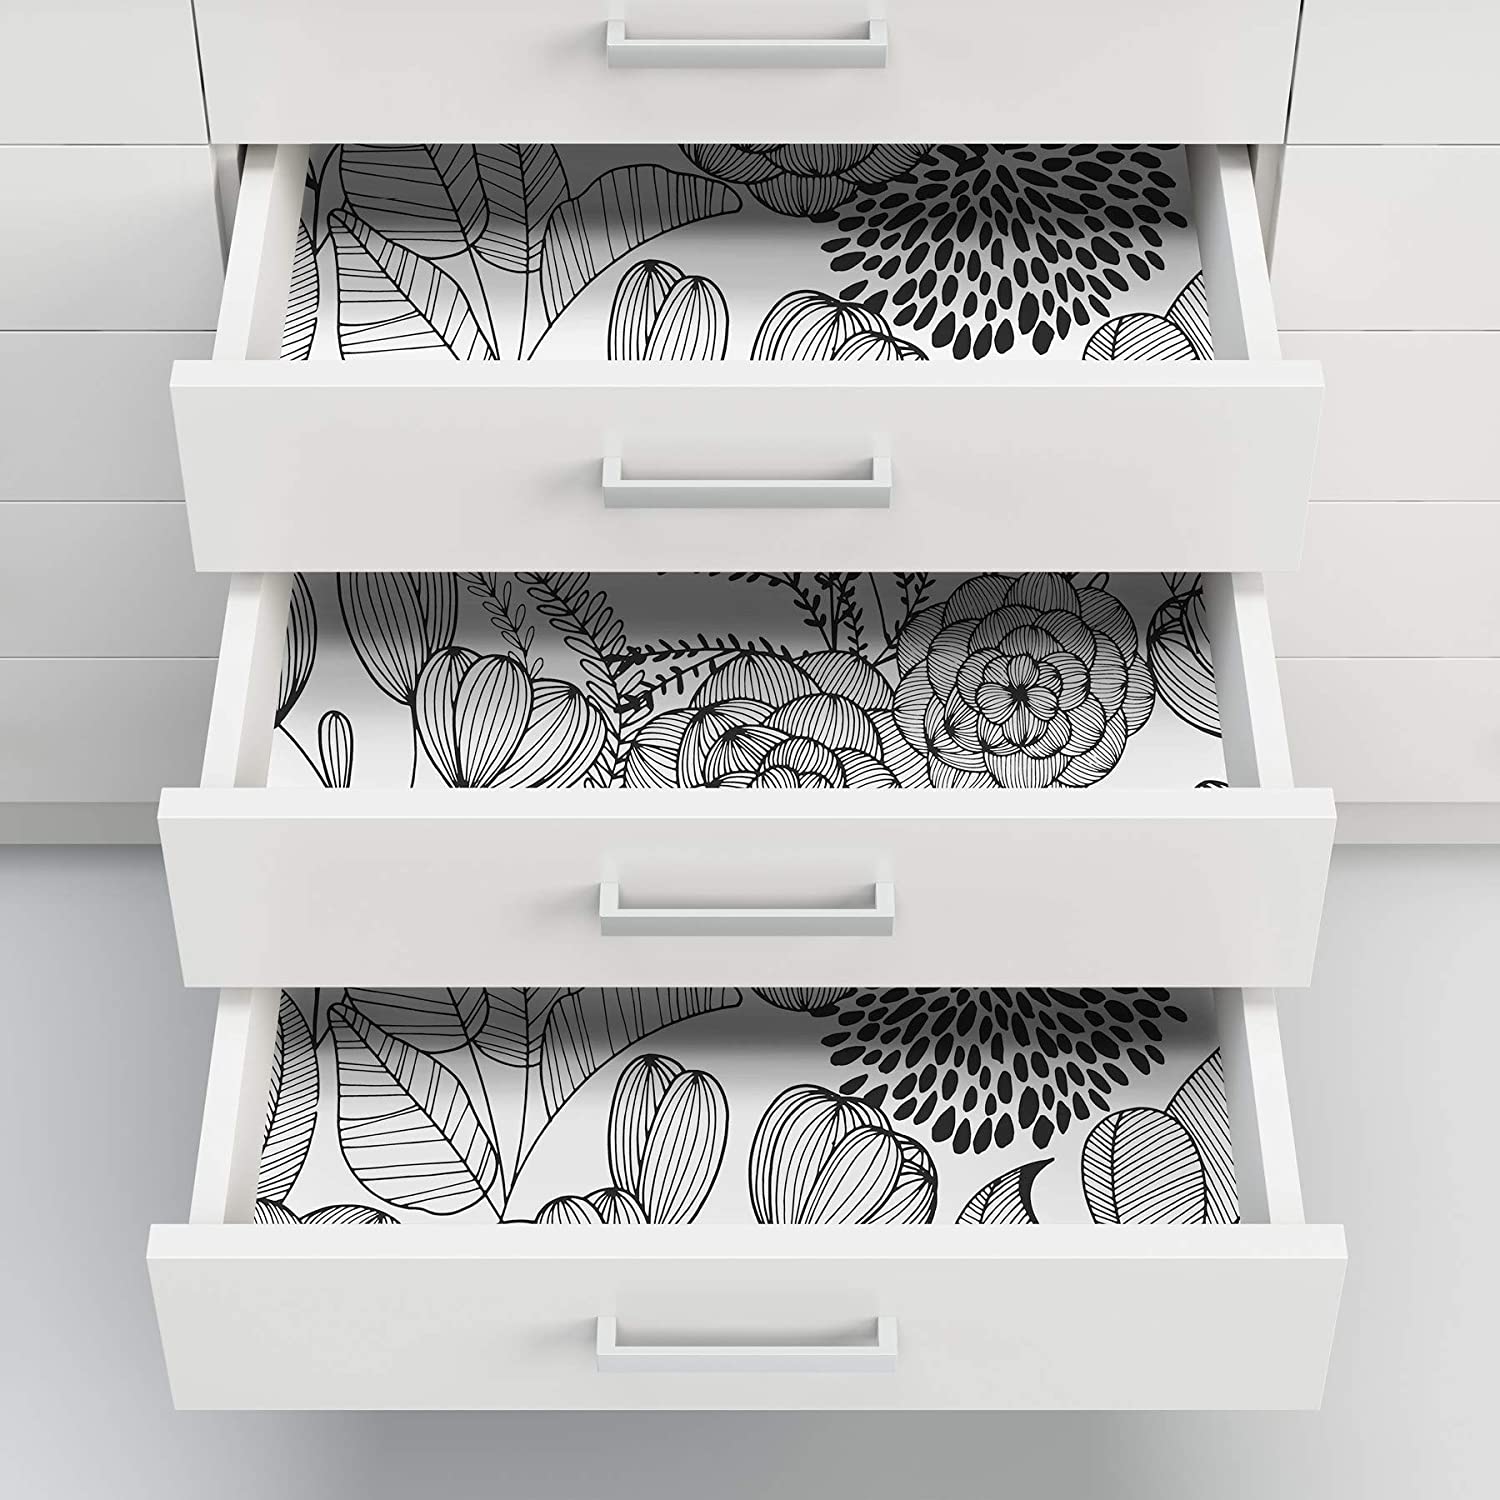 Understated and elegant - add a cool wallpaper inside the drawer